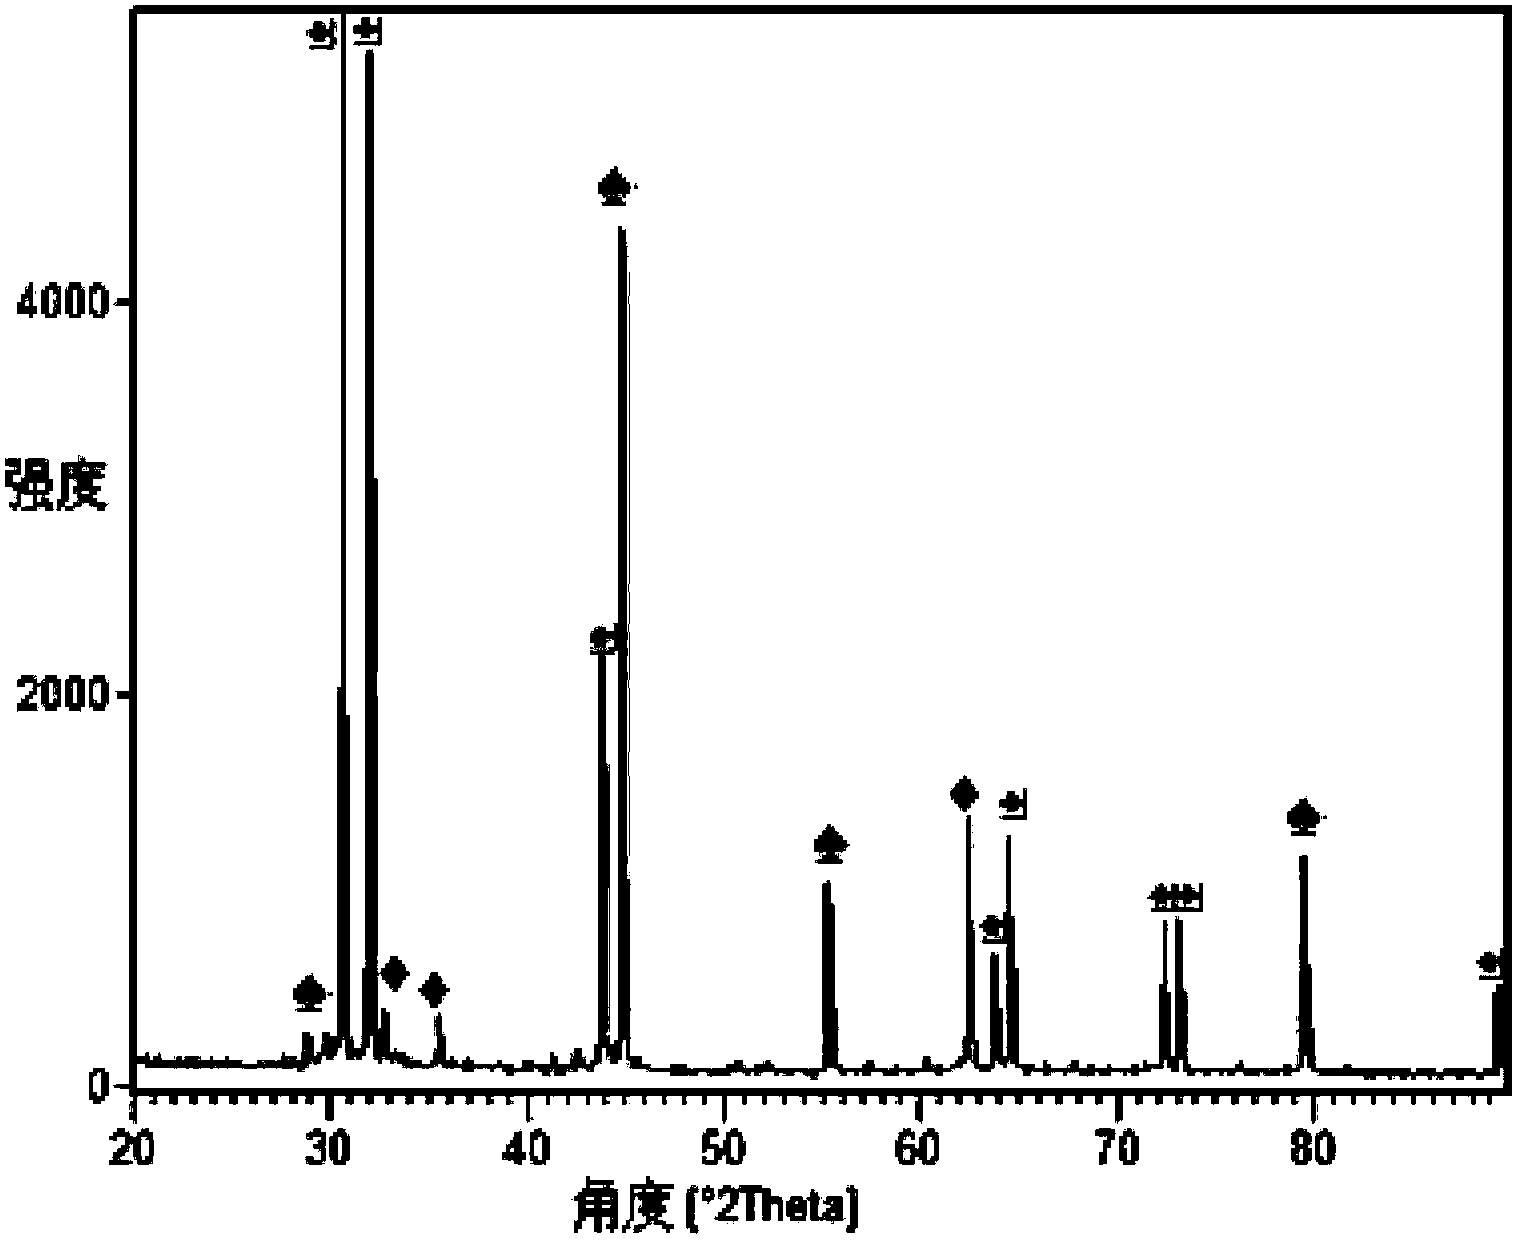 Sn-Co/C alloy cathode material of lithium ion battery and preparation method thereof